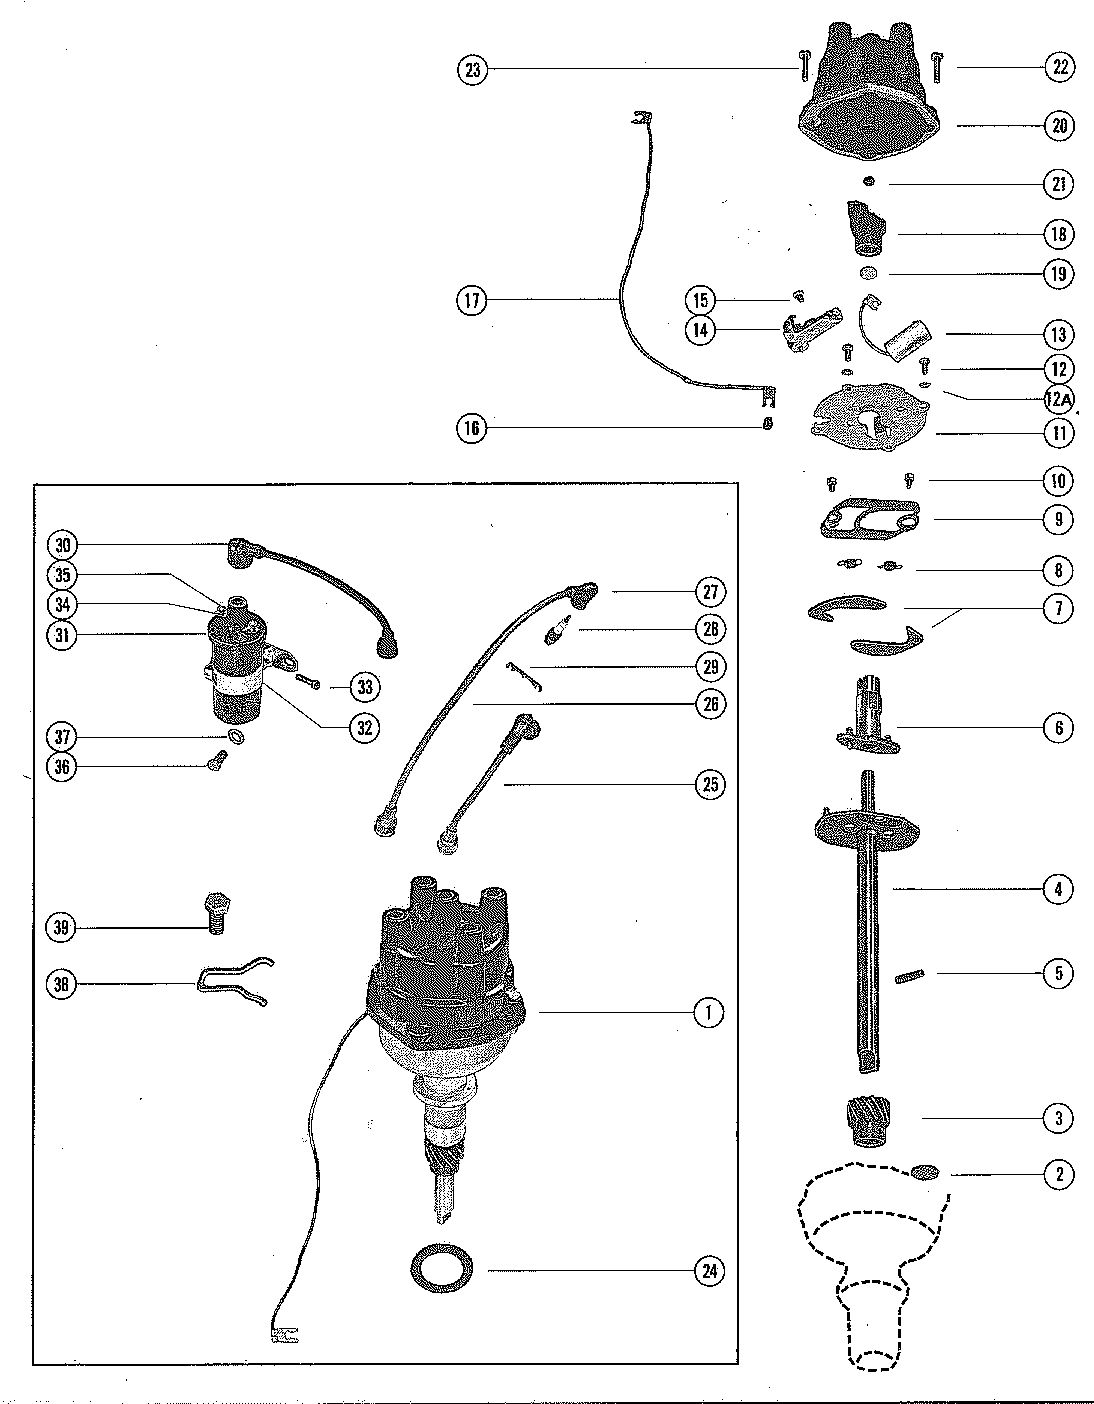 MERCRUISER 120 ENGINE DISTRIBUTOR ASSEMBLY AND COIL